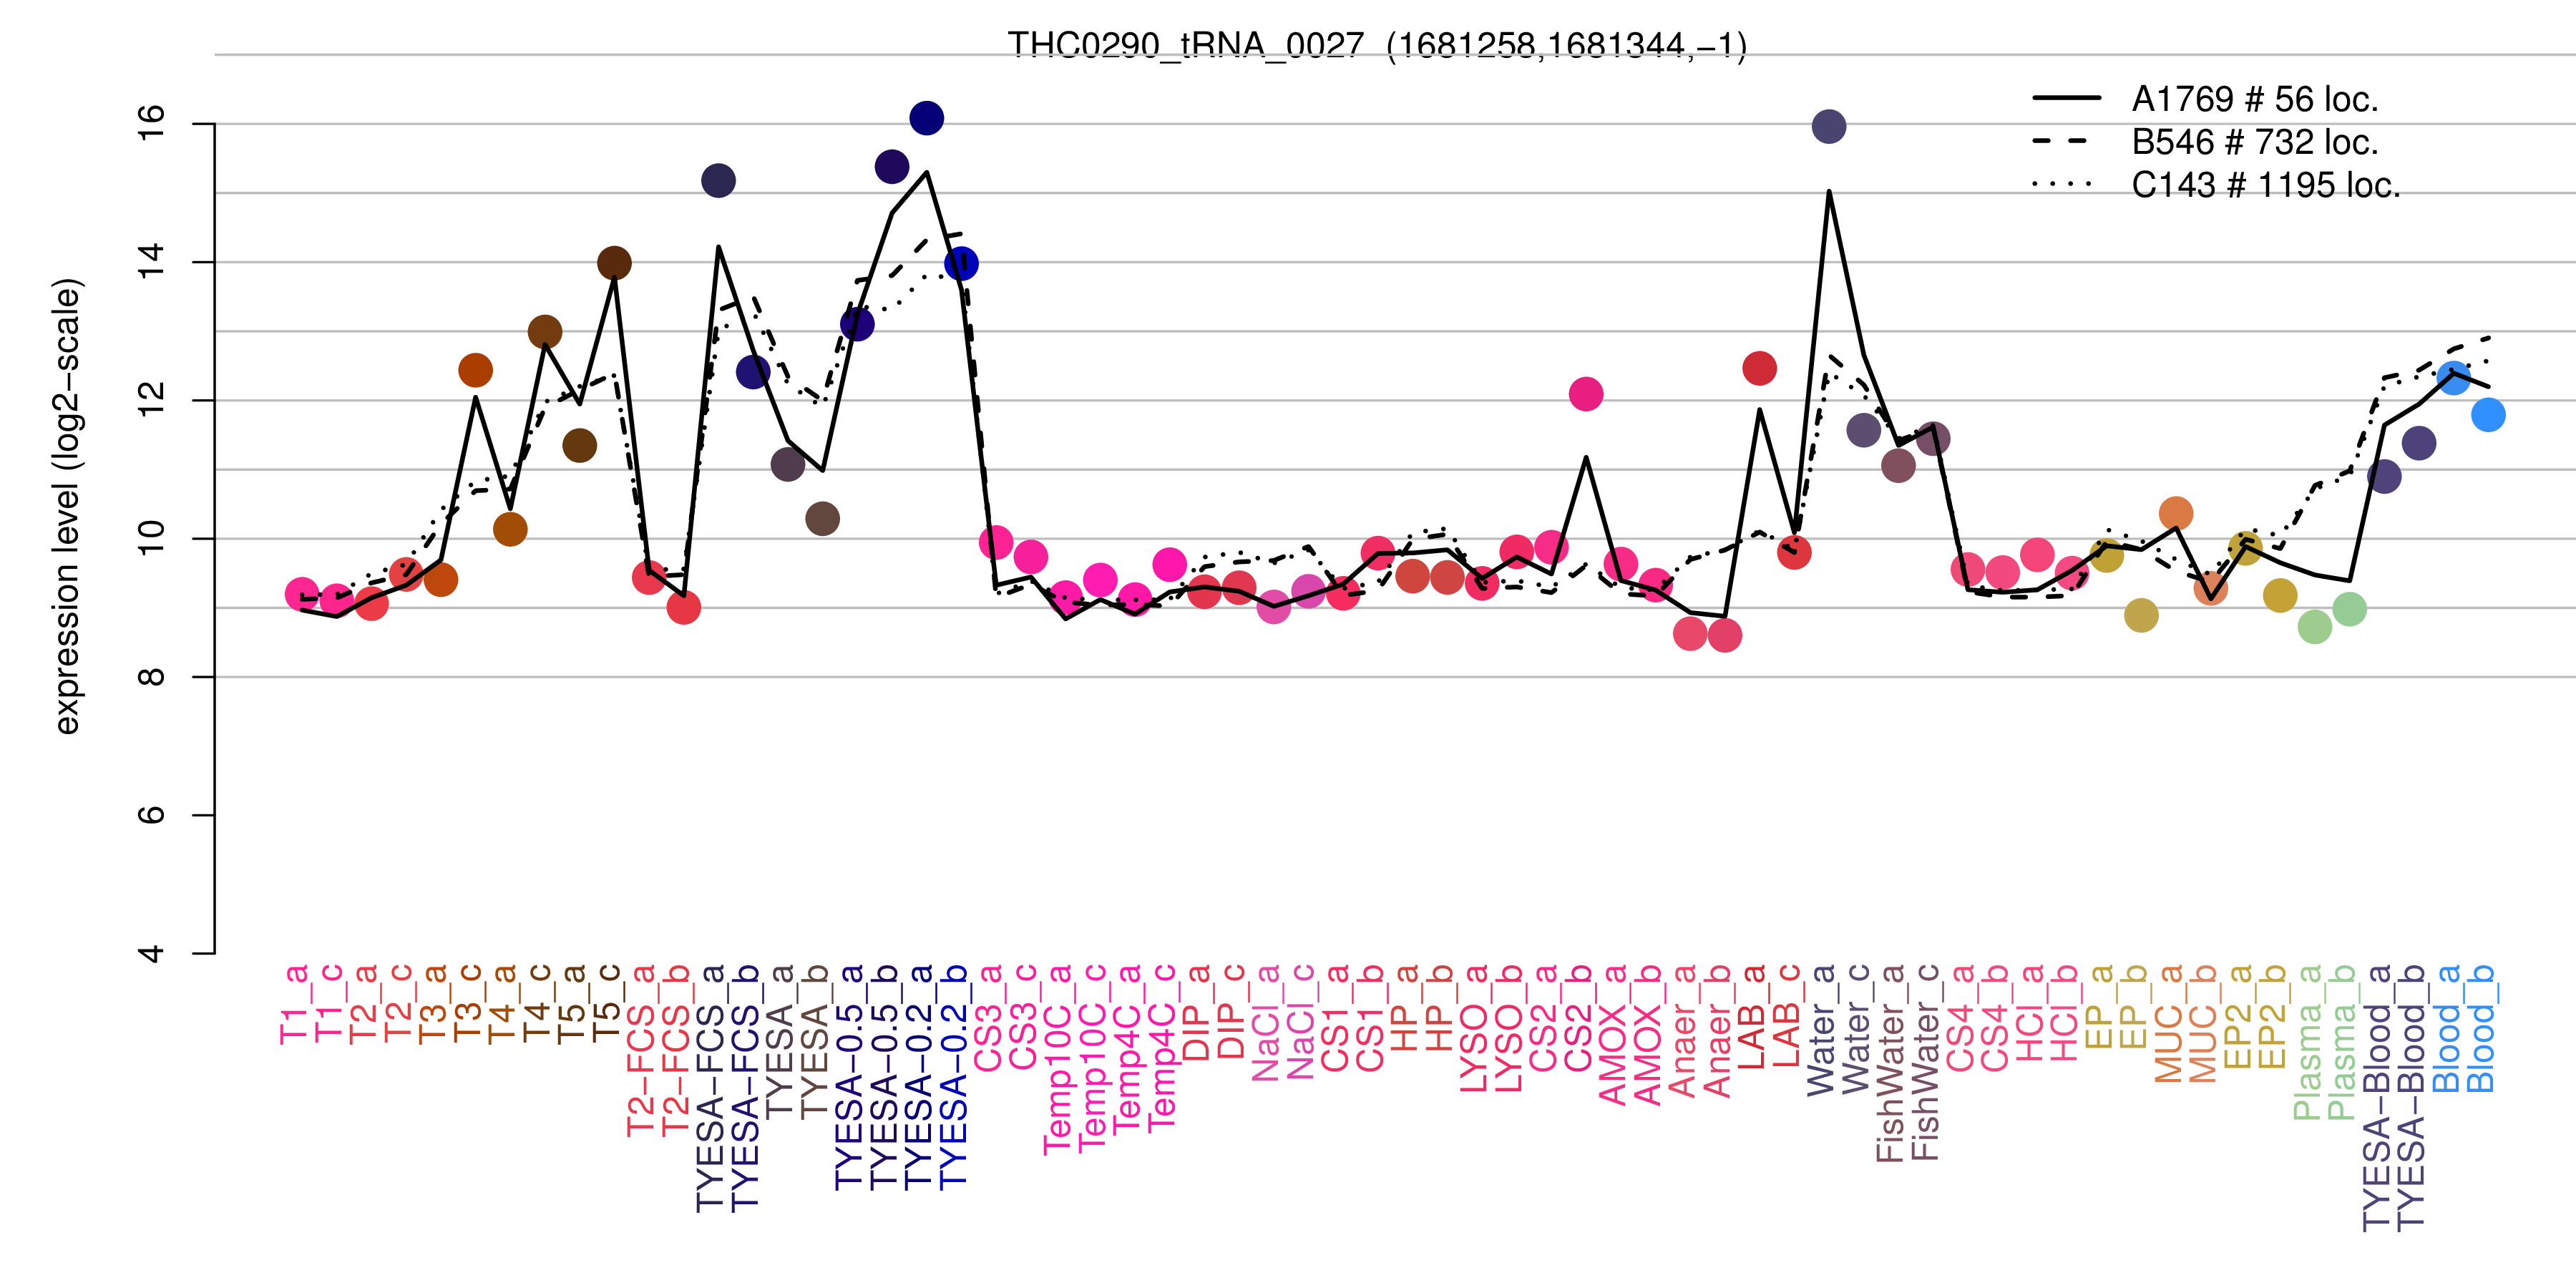 THC0290_tRNA_0027 expression levels among conditions